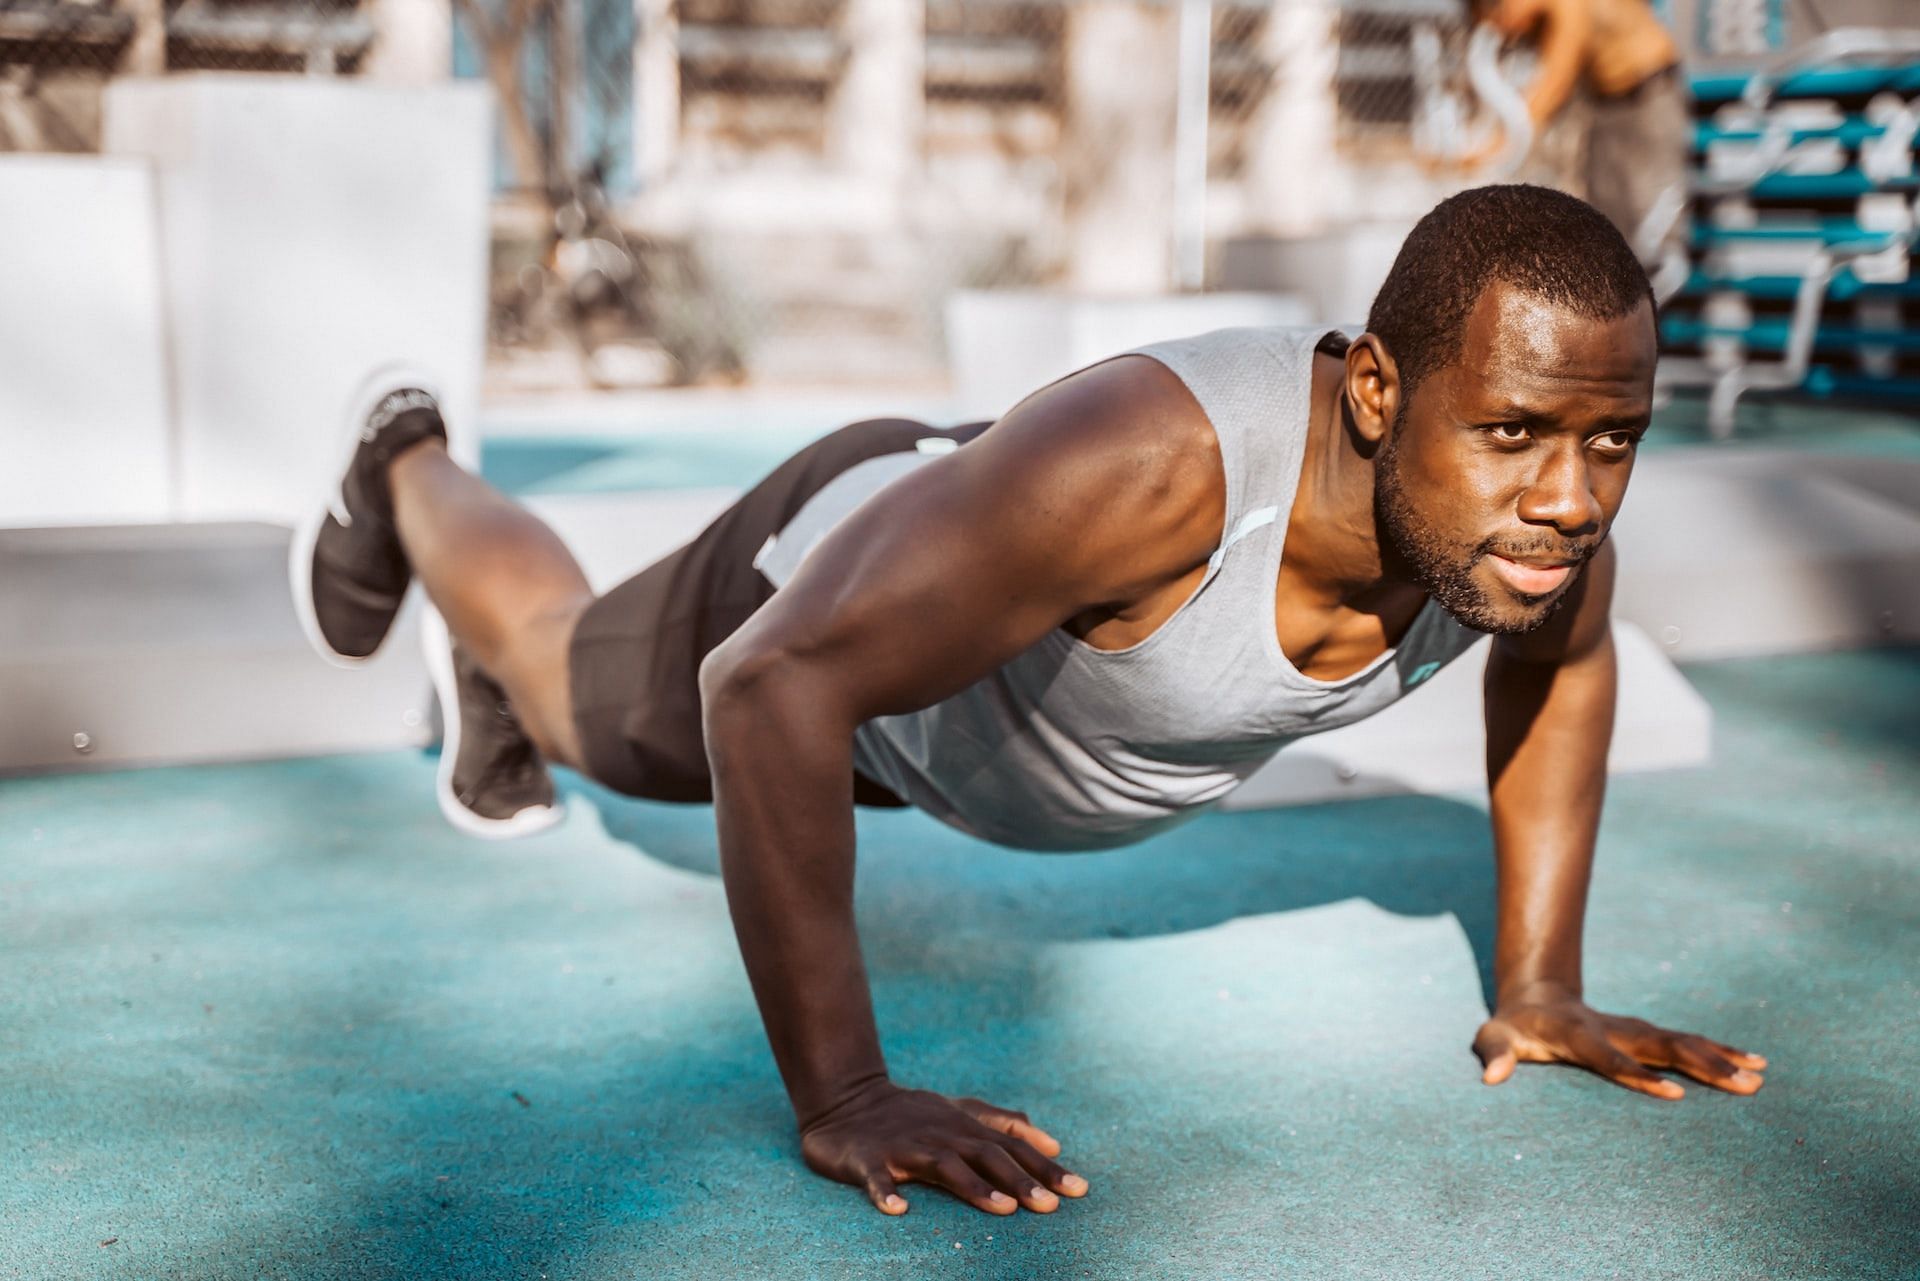 Best no equipment ab exercises for men to become stronger. (Photo via Fortune Vieyra/Unsplash)